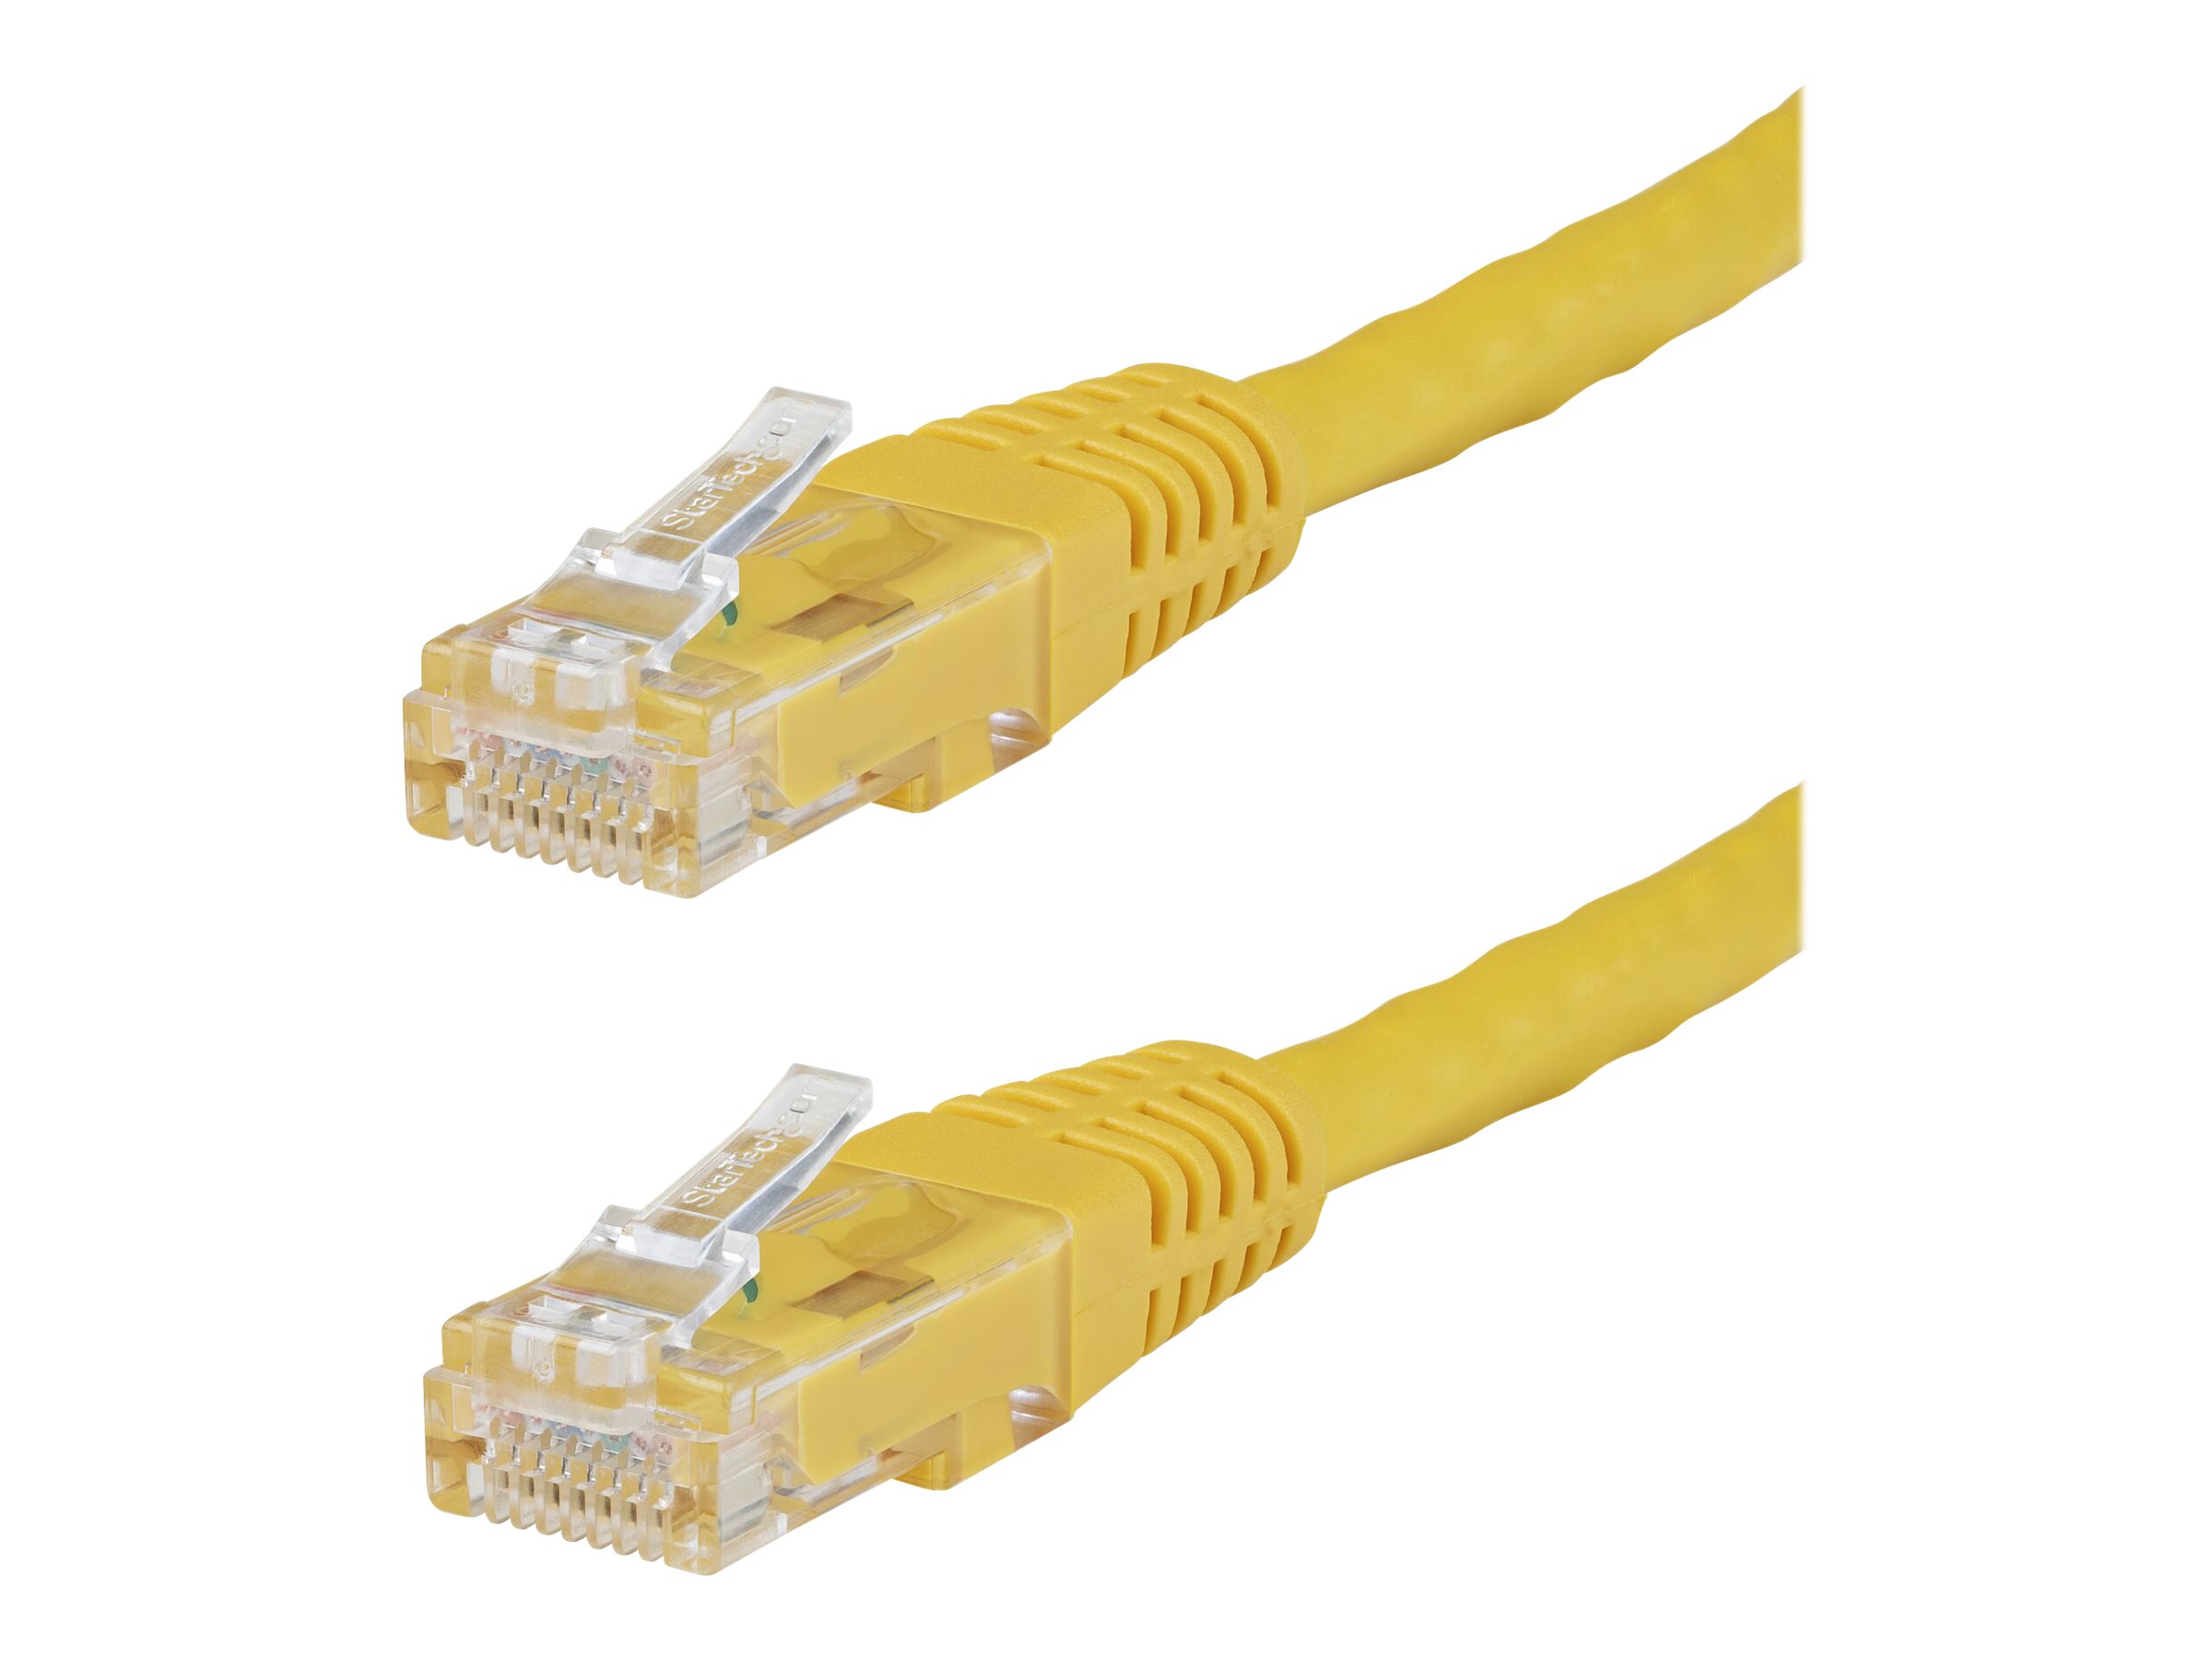 StarTech.com 10ft CAT6 Ethernet Cable, 10 Gigabit Molded RJ45 650MHz 100W PoE Patch Cord, CAT 6 10GbE UTP Network Cable with Strain Relief, Yellow, Fluke Tested/Wiring is UL Certified/TIA